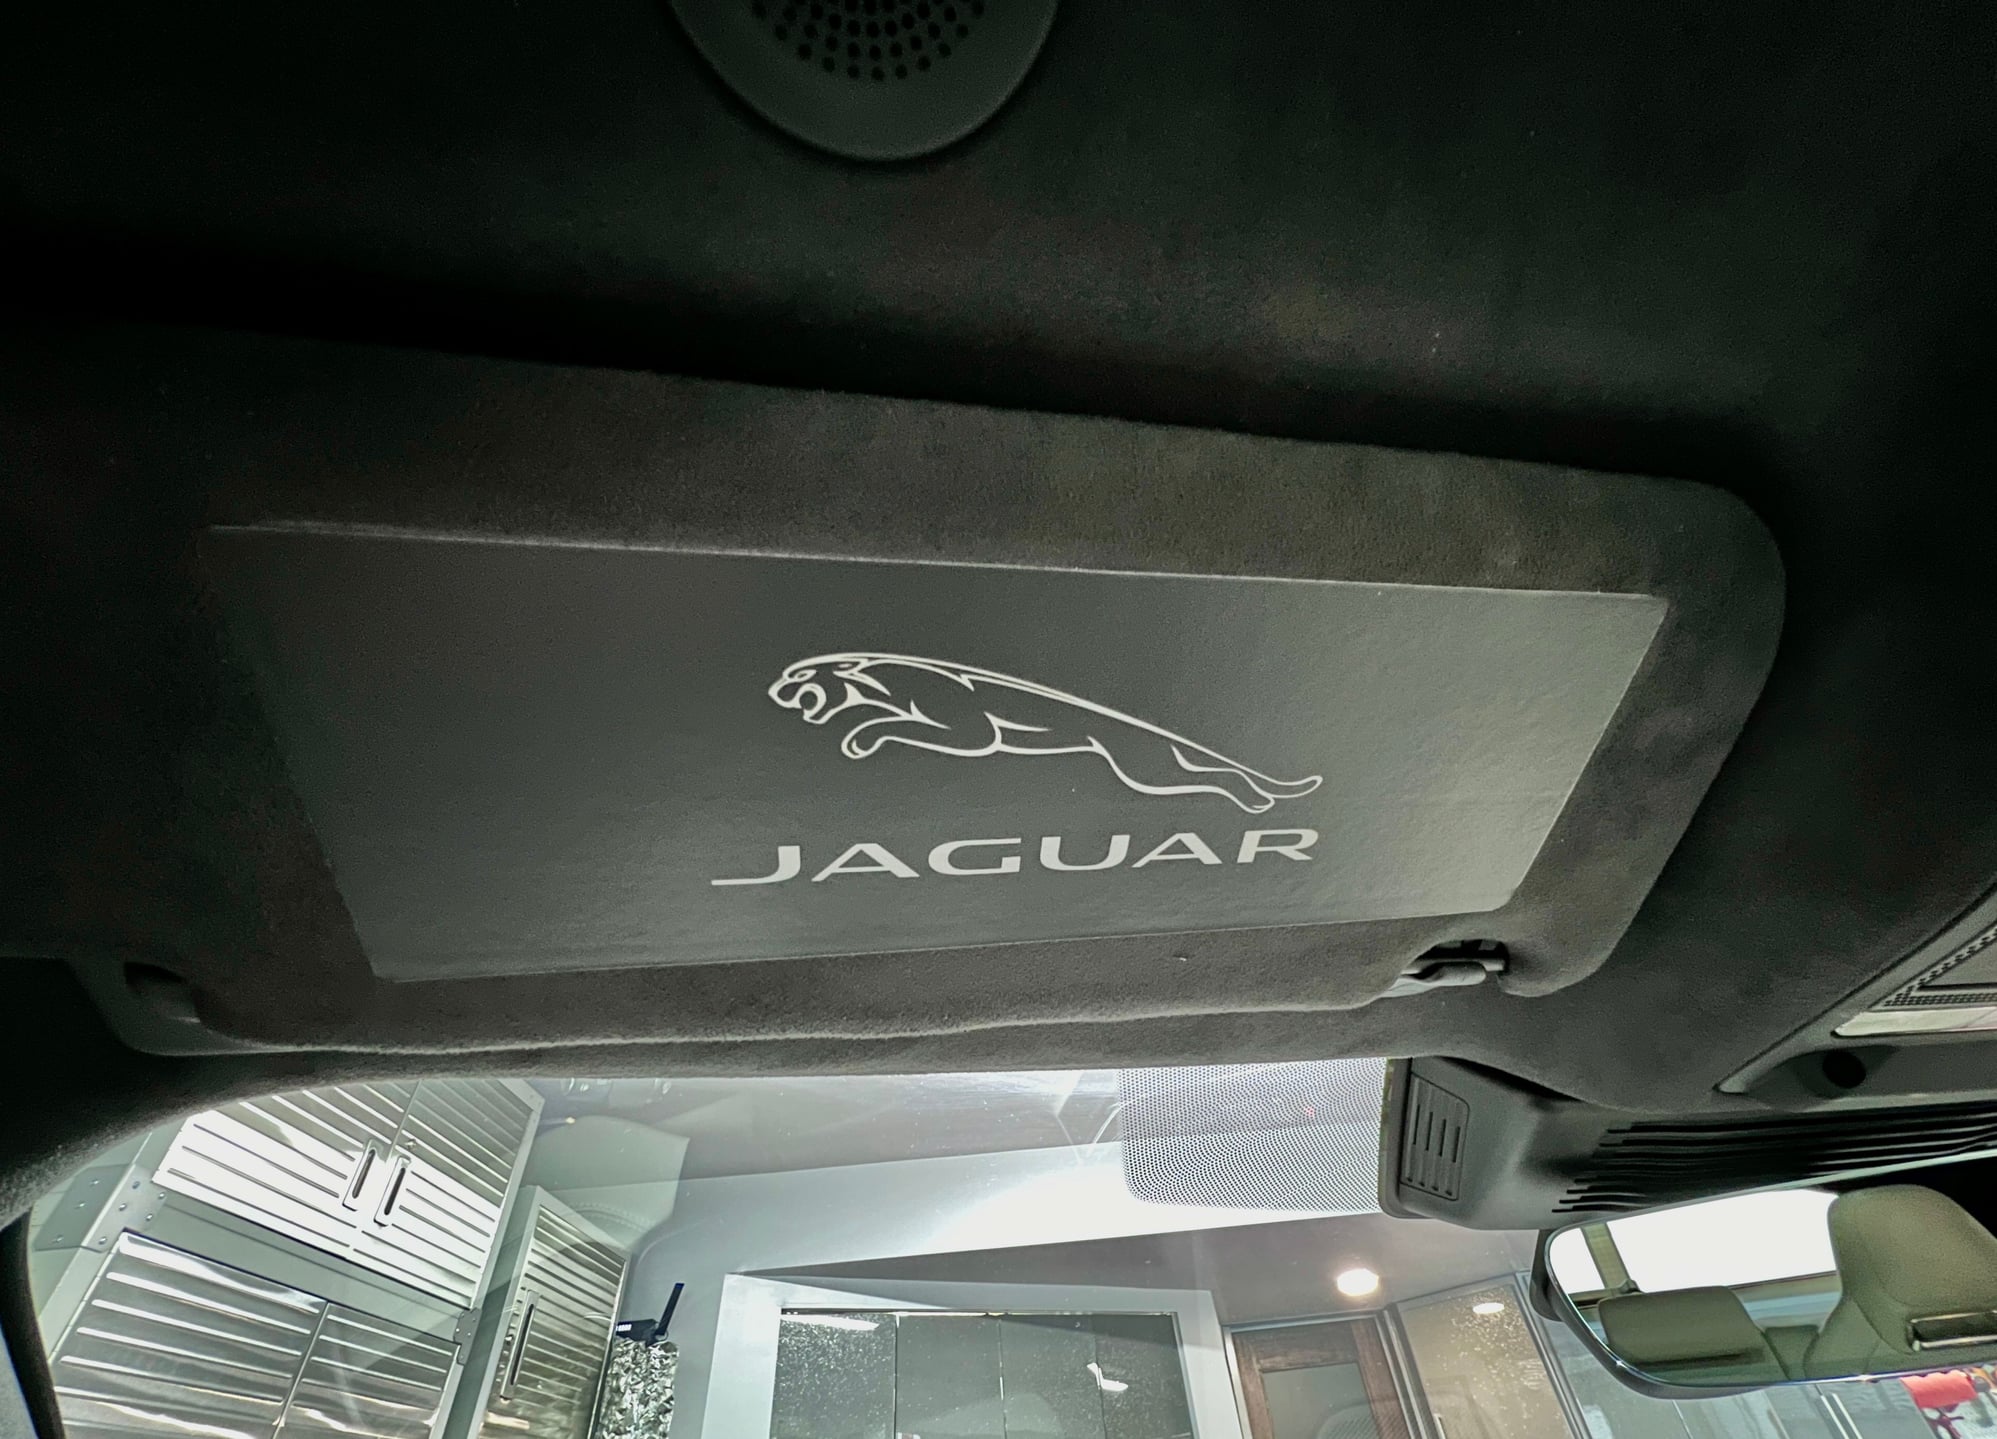 Interior/Upholstery - Jaguar Visor Stickers (covers ugly air bag warnings) - New - 0  All Models - Seattle, WA 98116, United States